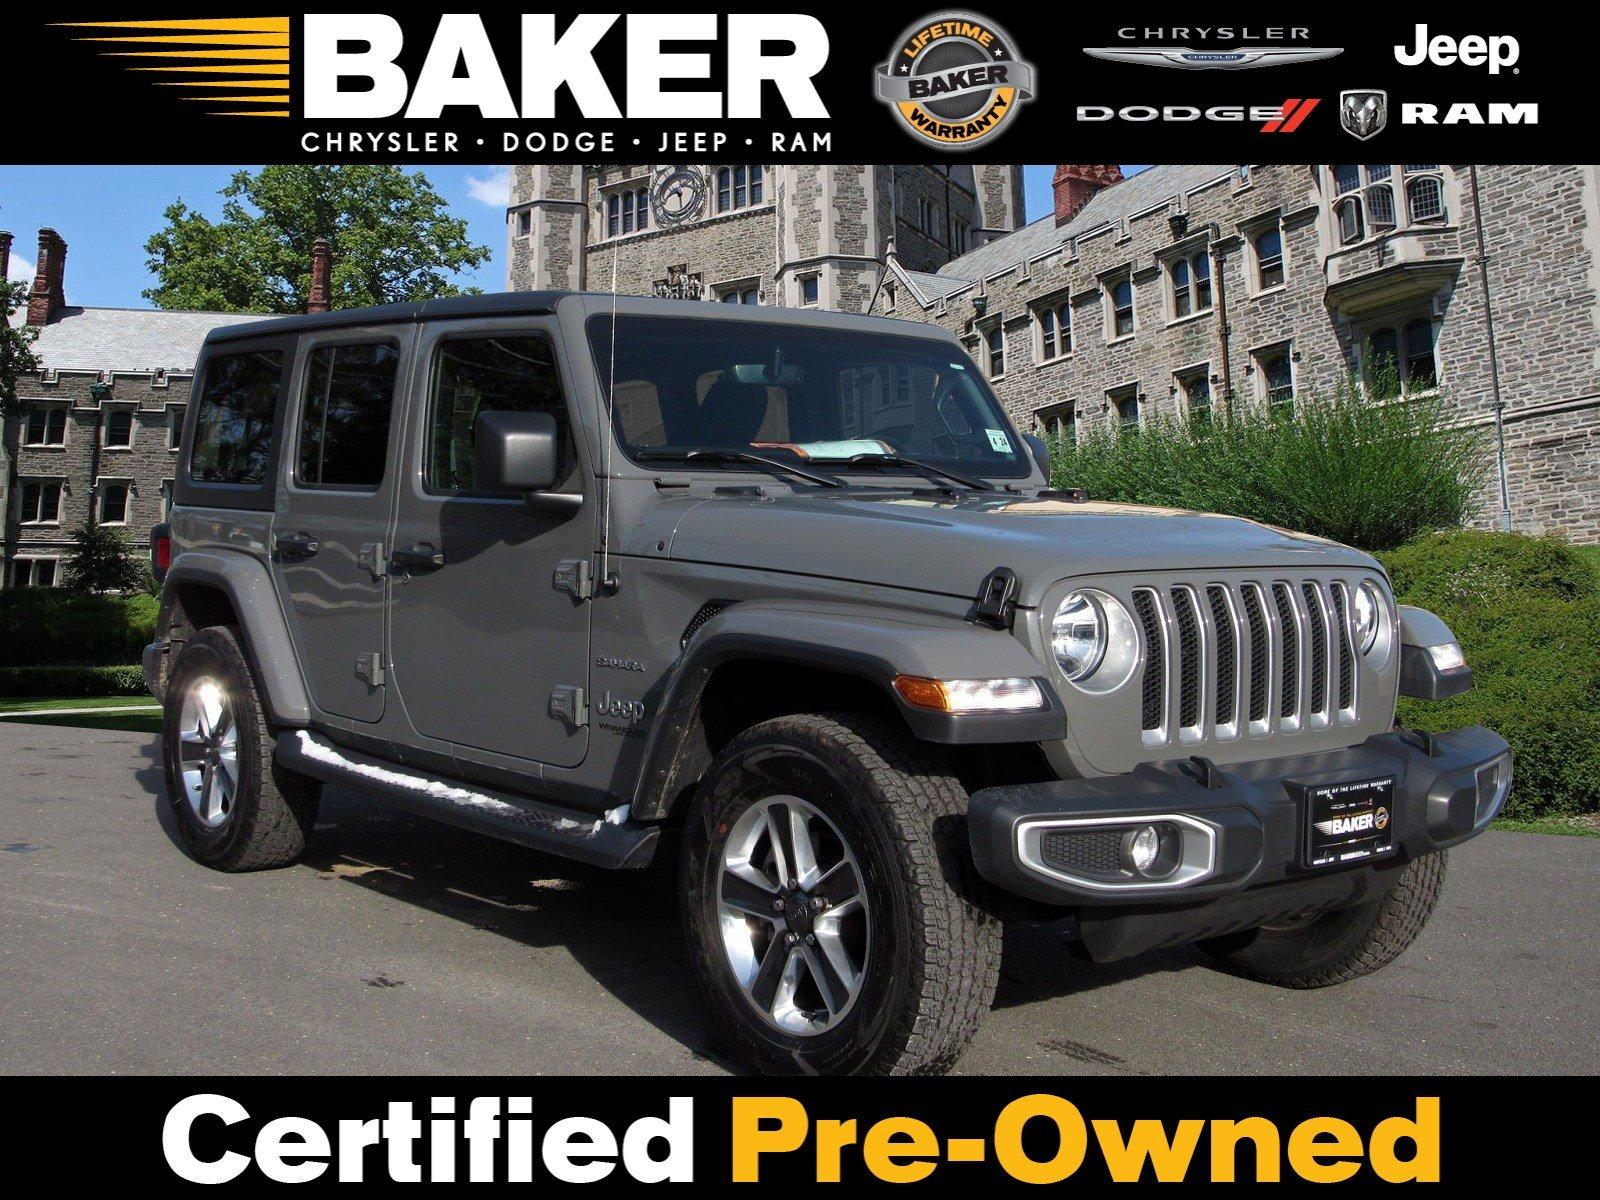 Used 2018 Jeep Wrangler Unlimited Sahara For Sale ($37,995) | Victory Lotus  Stock #327538